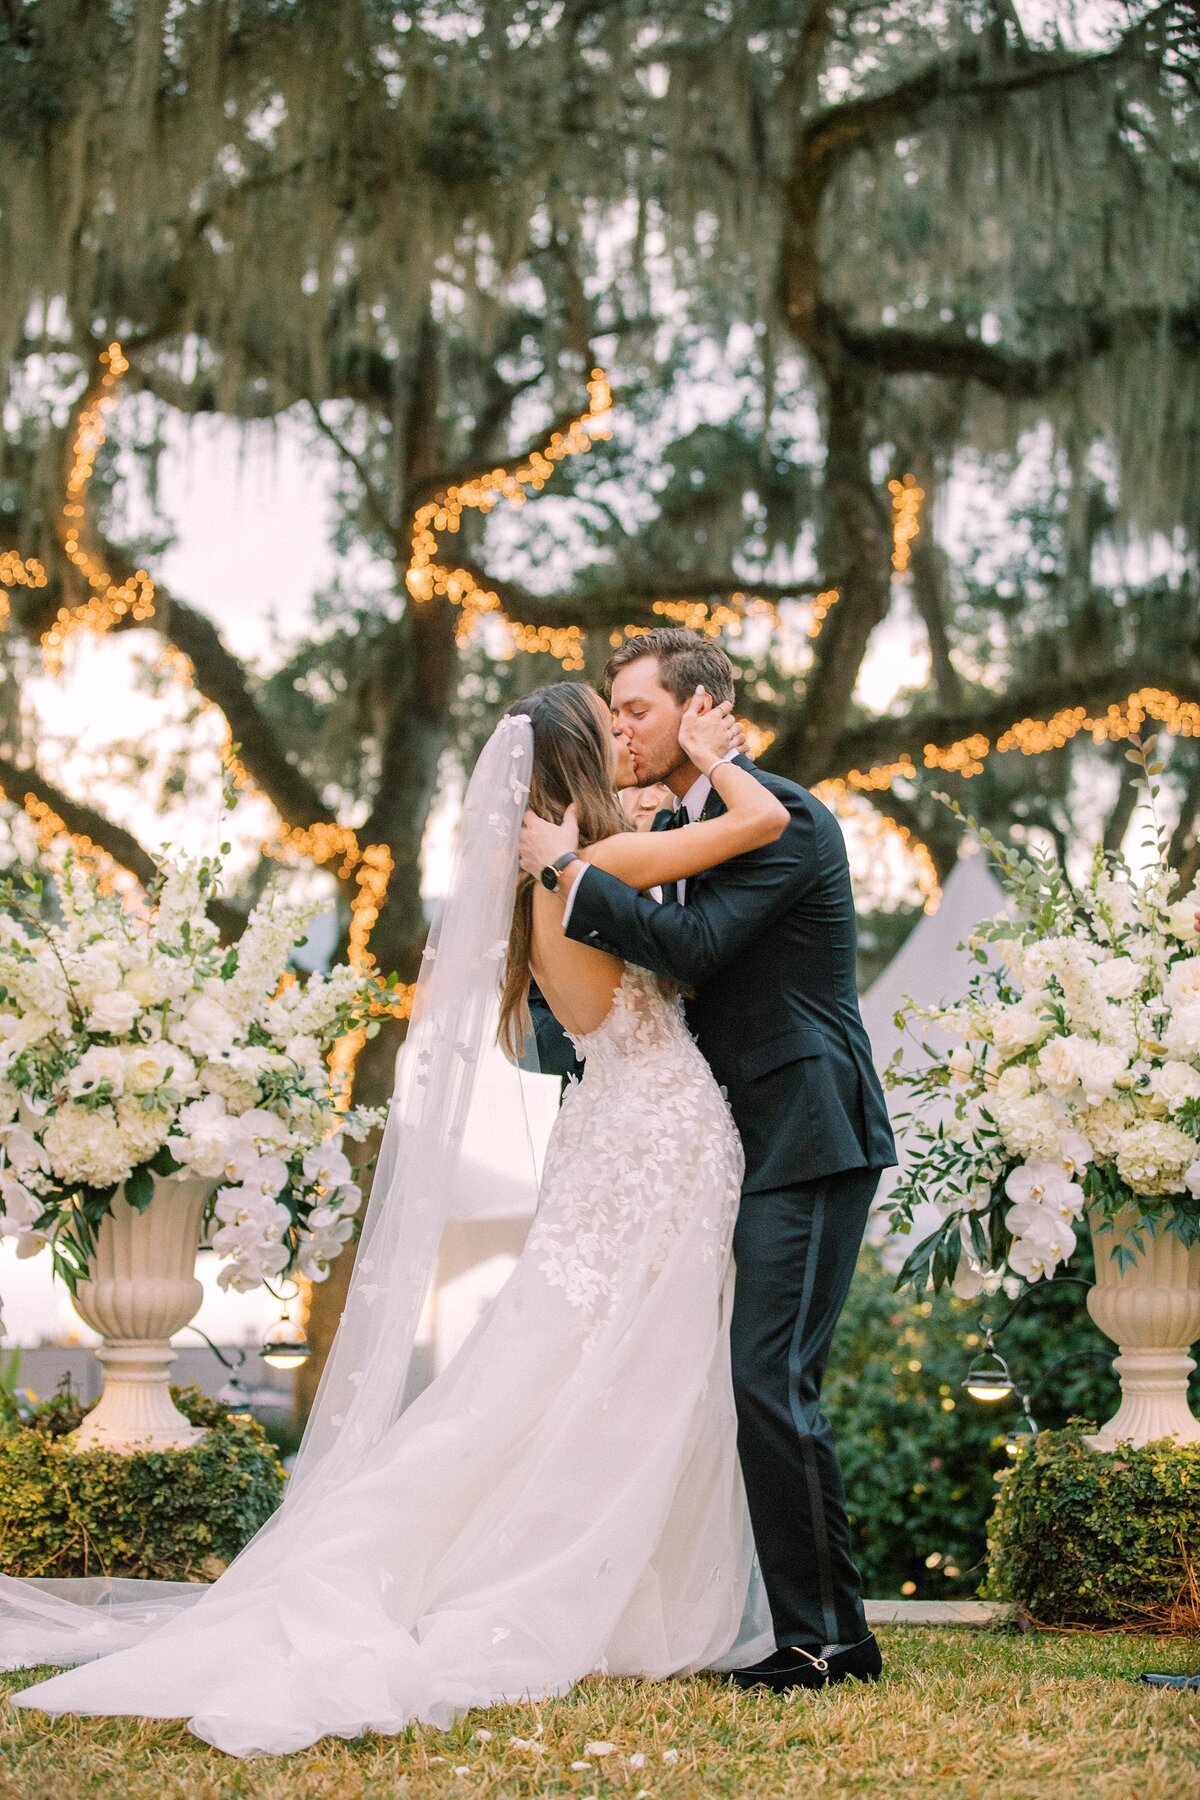 A wedding at a private estate in Tallahassee, FL - 30